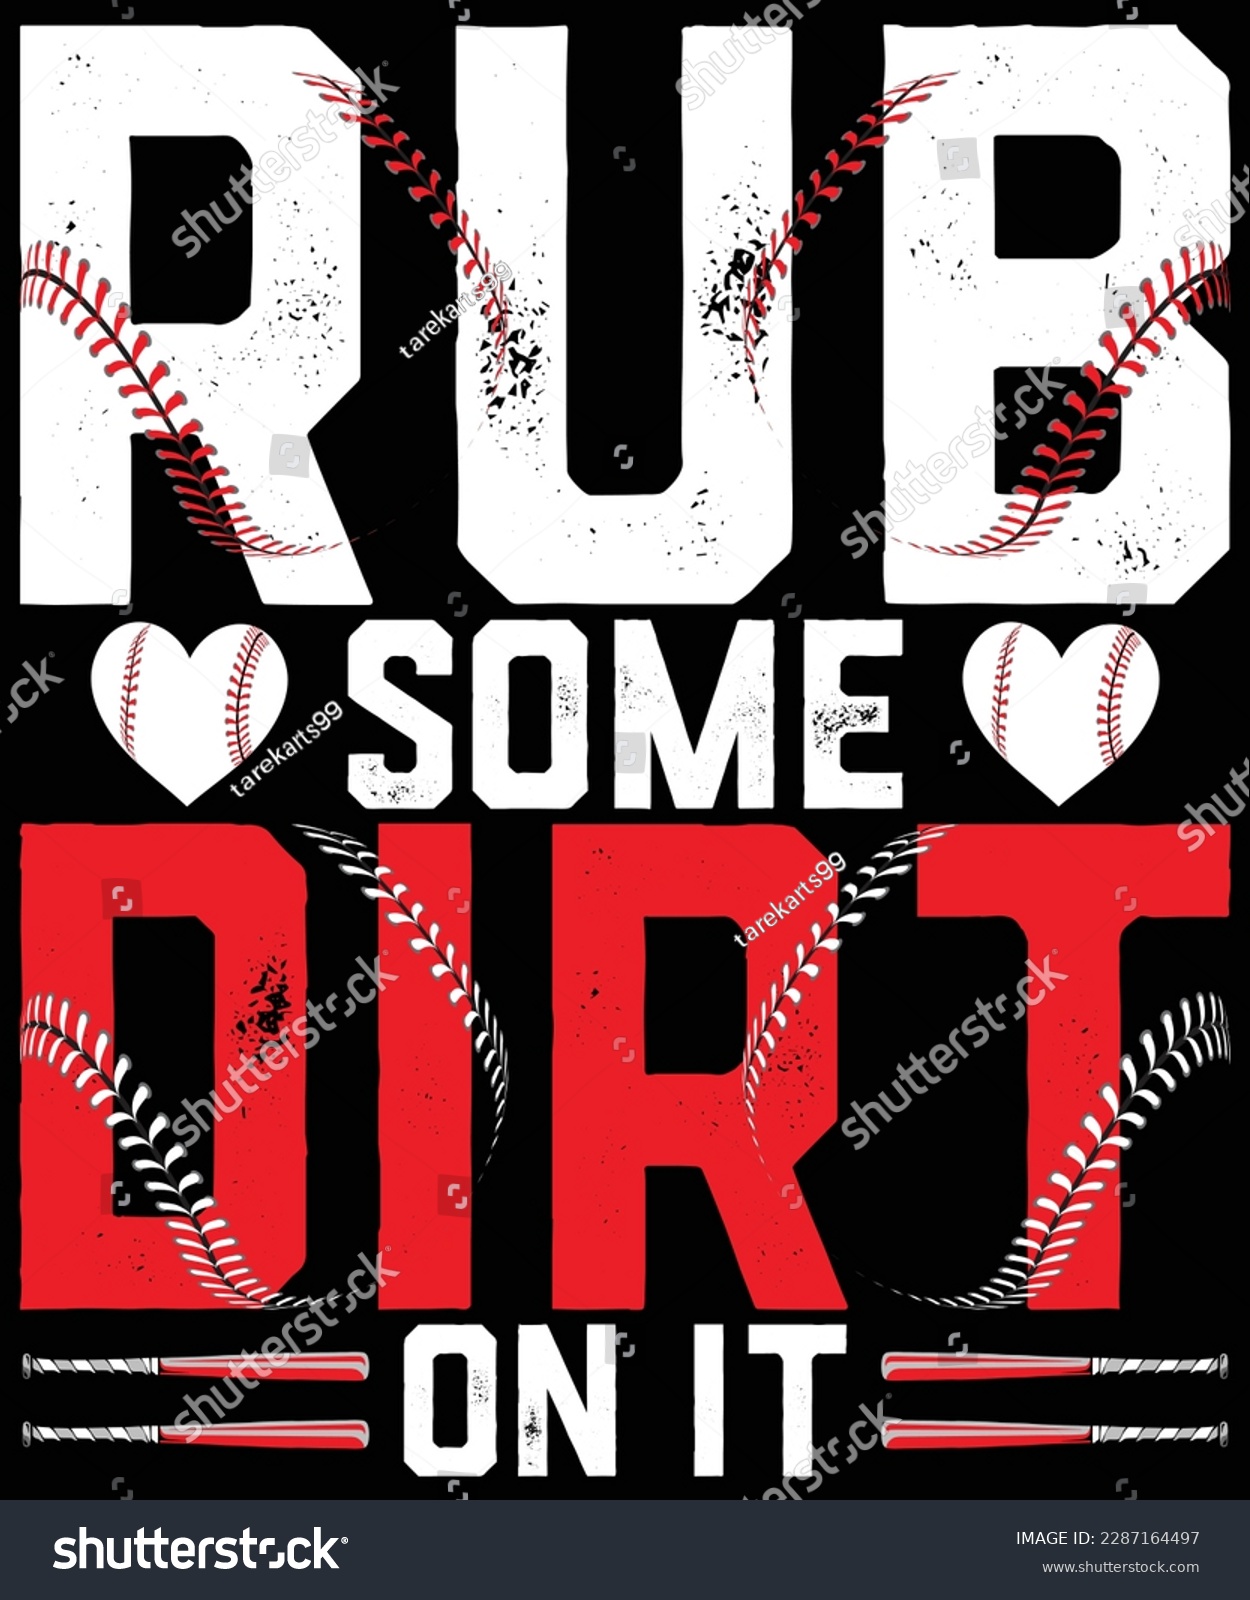 SVG of Baseball T-shirt Design Rub Some Dirt On It Baseball Graphic Cute T-Shirt Women’s Letter Printed Softball Tees Casual Sports Tops T-Shirt design, Posters, Greeting Cards, Textiles, and Sticker Vector svg